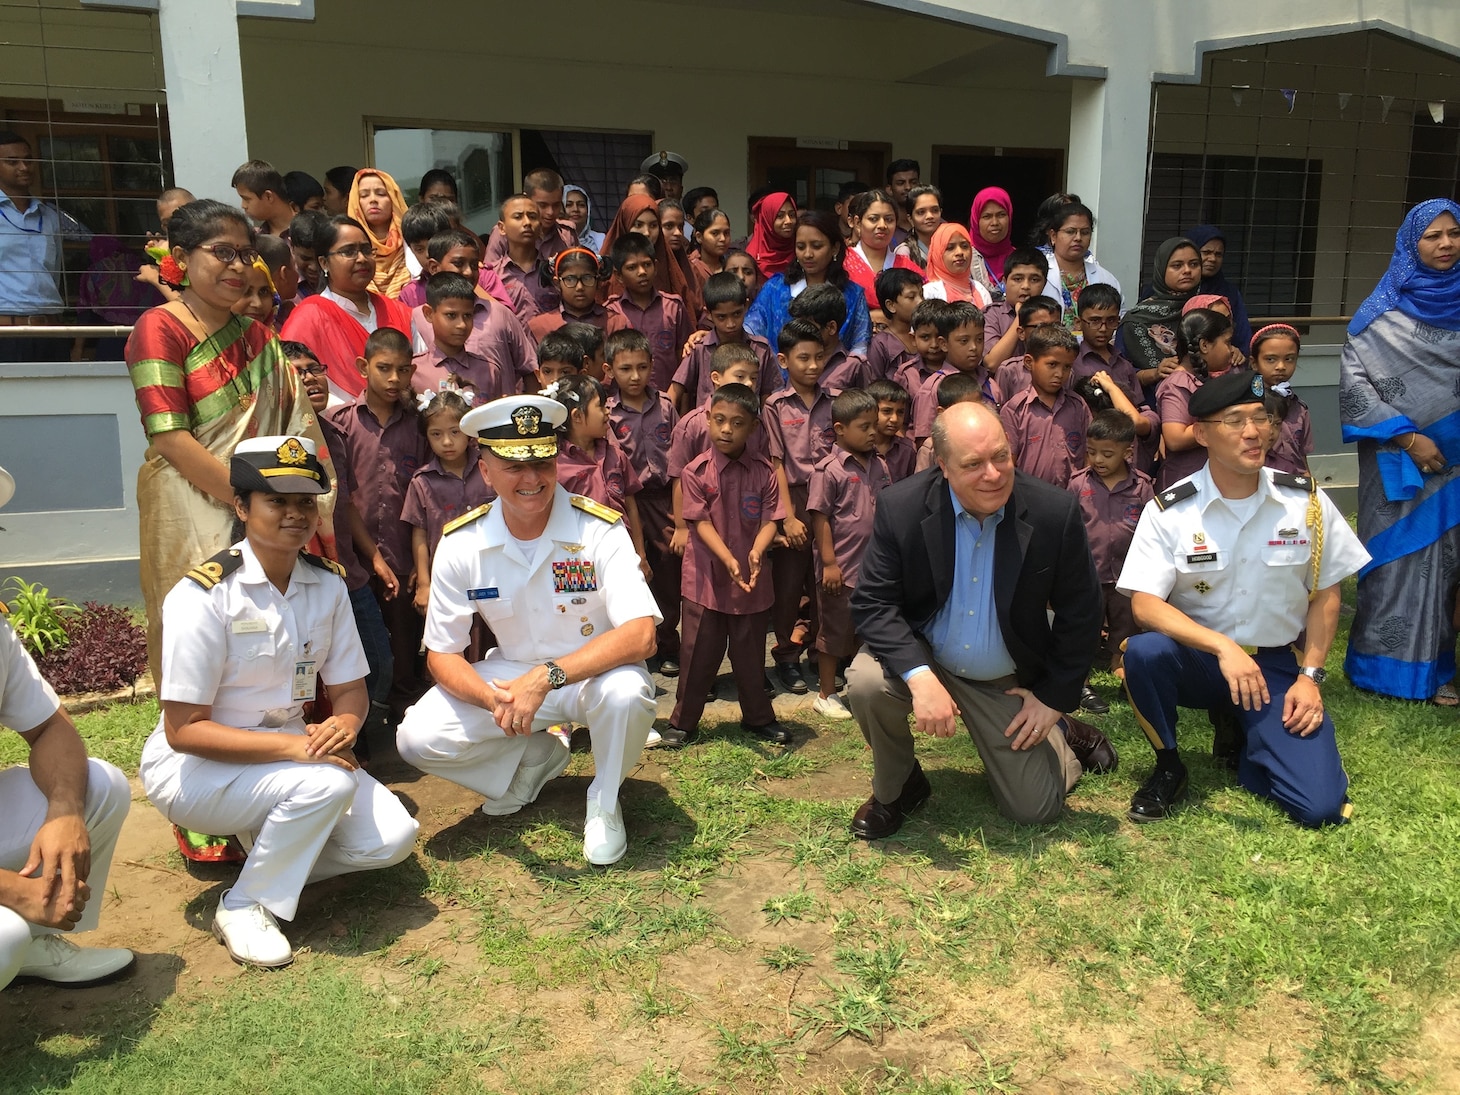 CHITTAGONG, Bangladesh (April 25, 2019) Rear Admiral Joey Tynch, commander, Logistics Group Western Pacific, and Joel Reifman, U.S. Deputy Chief of Mission to Bangladesh, pose for a photo with U.S. representatives and local students at Ashar Alo primary school. Tynch visited Ashar Alo, a school financed and directed by the Bangladesh Navy for special needs children, following a ceremony commemorating the exchange of five metal patrol boats and celebrating the long-standing partnership between both nations.